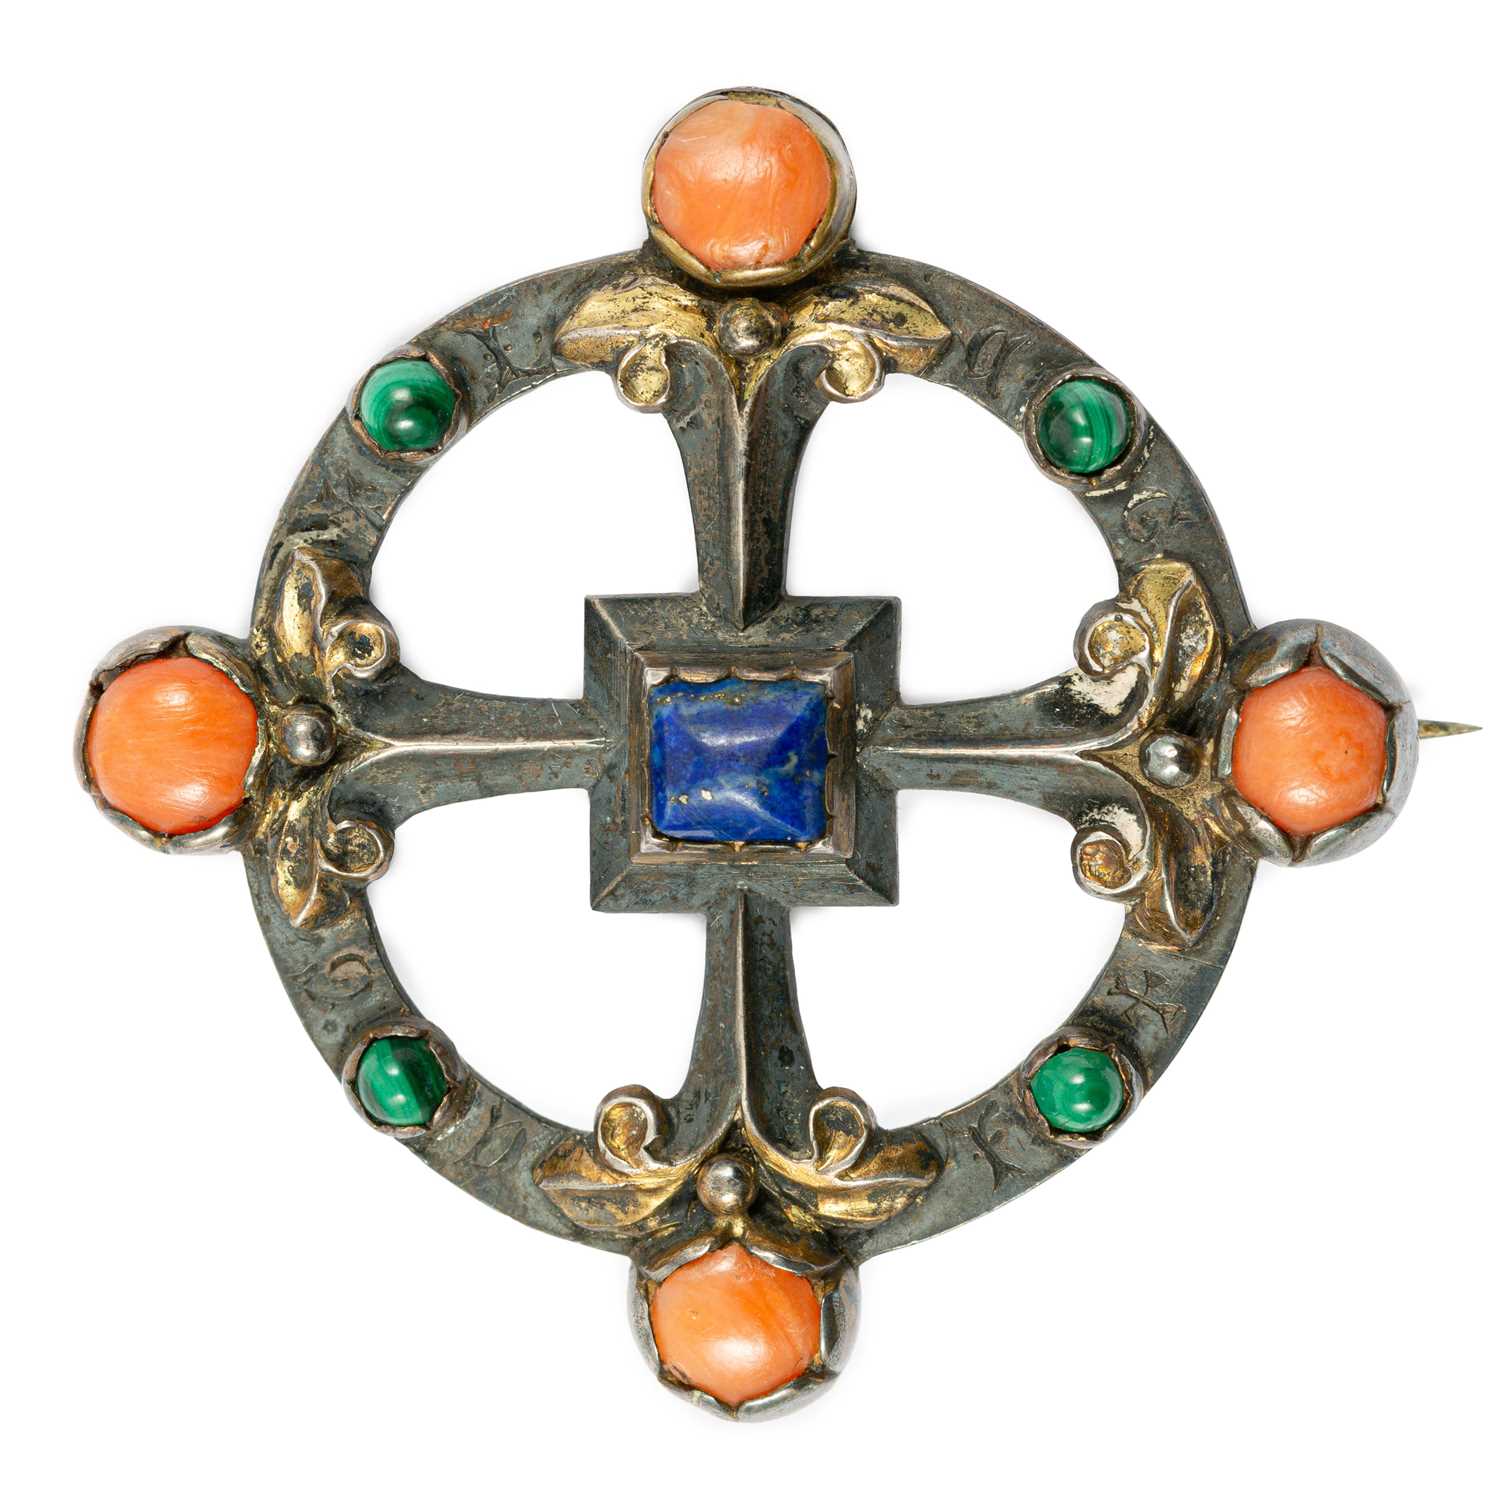 184 - A Victorian Gothic Revival brooch designed by William Burges.